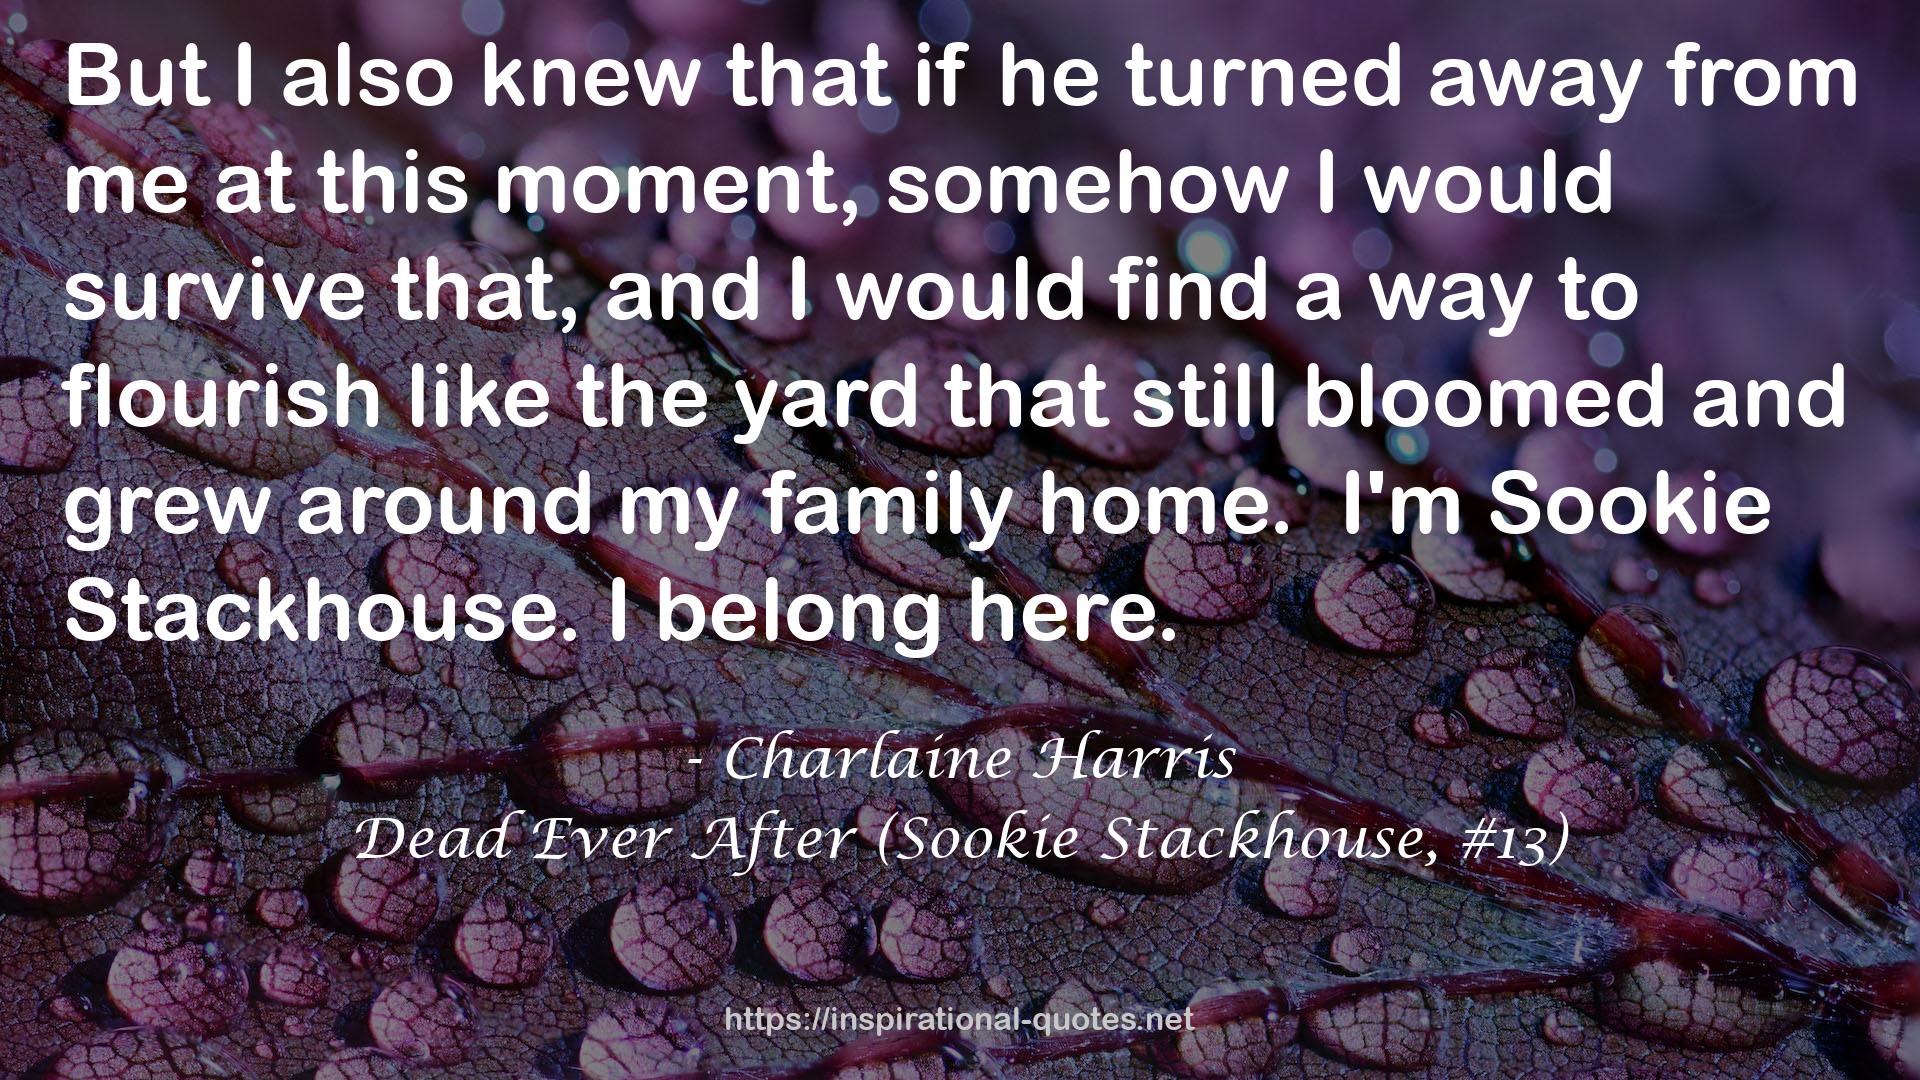 Dead Ever After (Sookie Stackhouse, #13) QUOTES